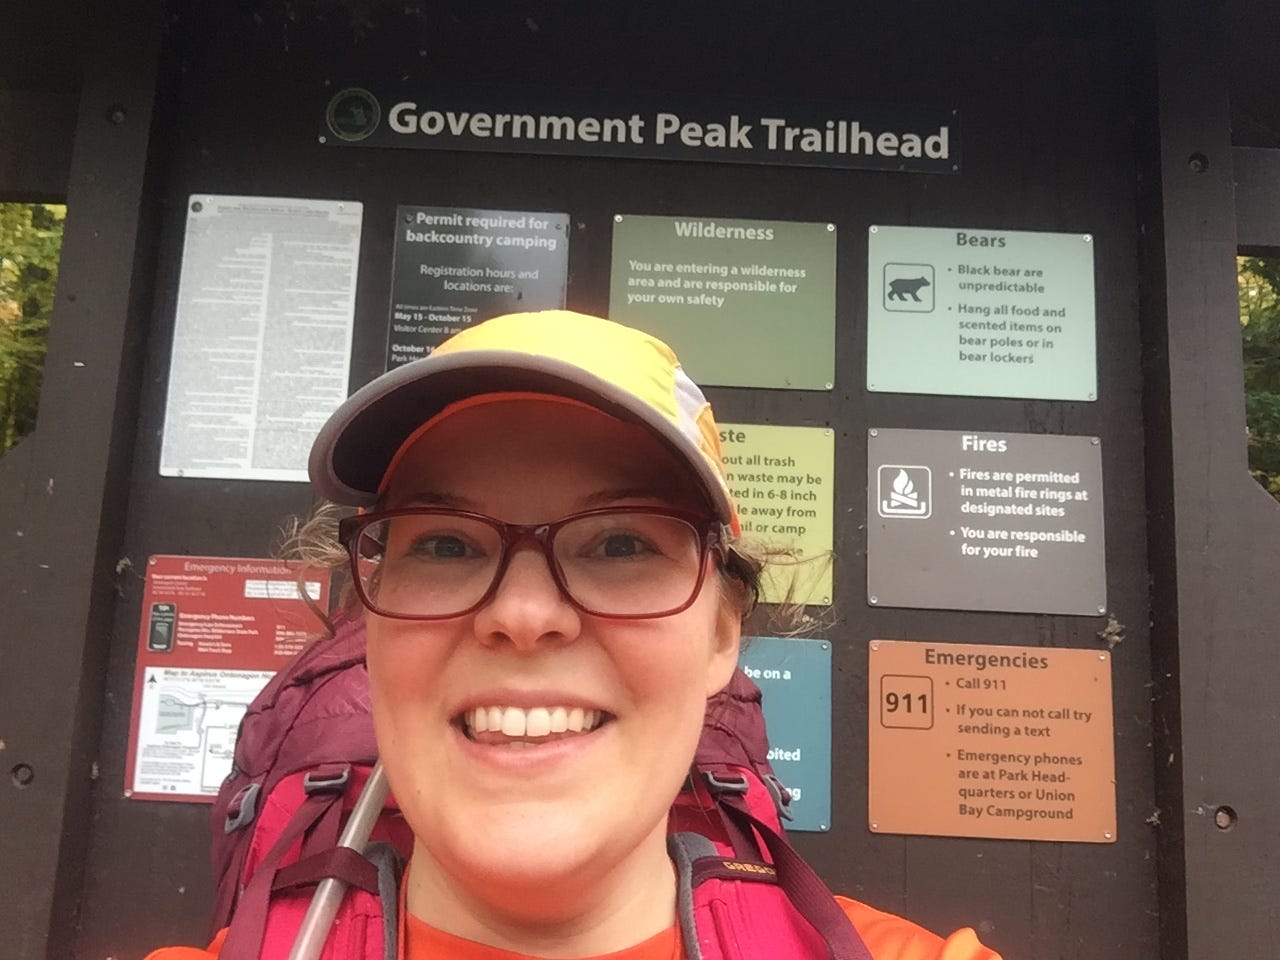 The author wearing an orange hat, red glasses, and a red backpack standing in front of the Government Peak Trailhead sign.